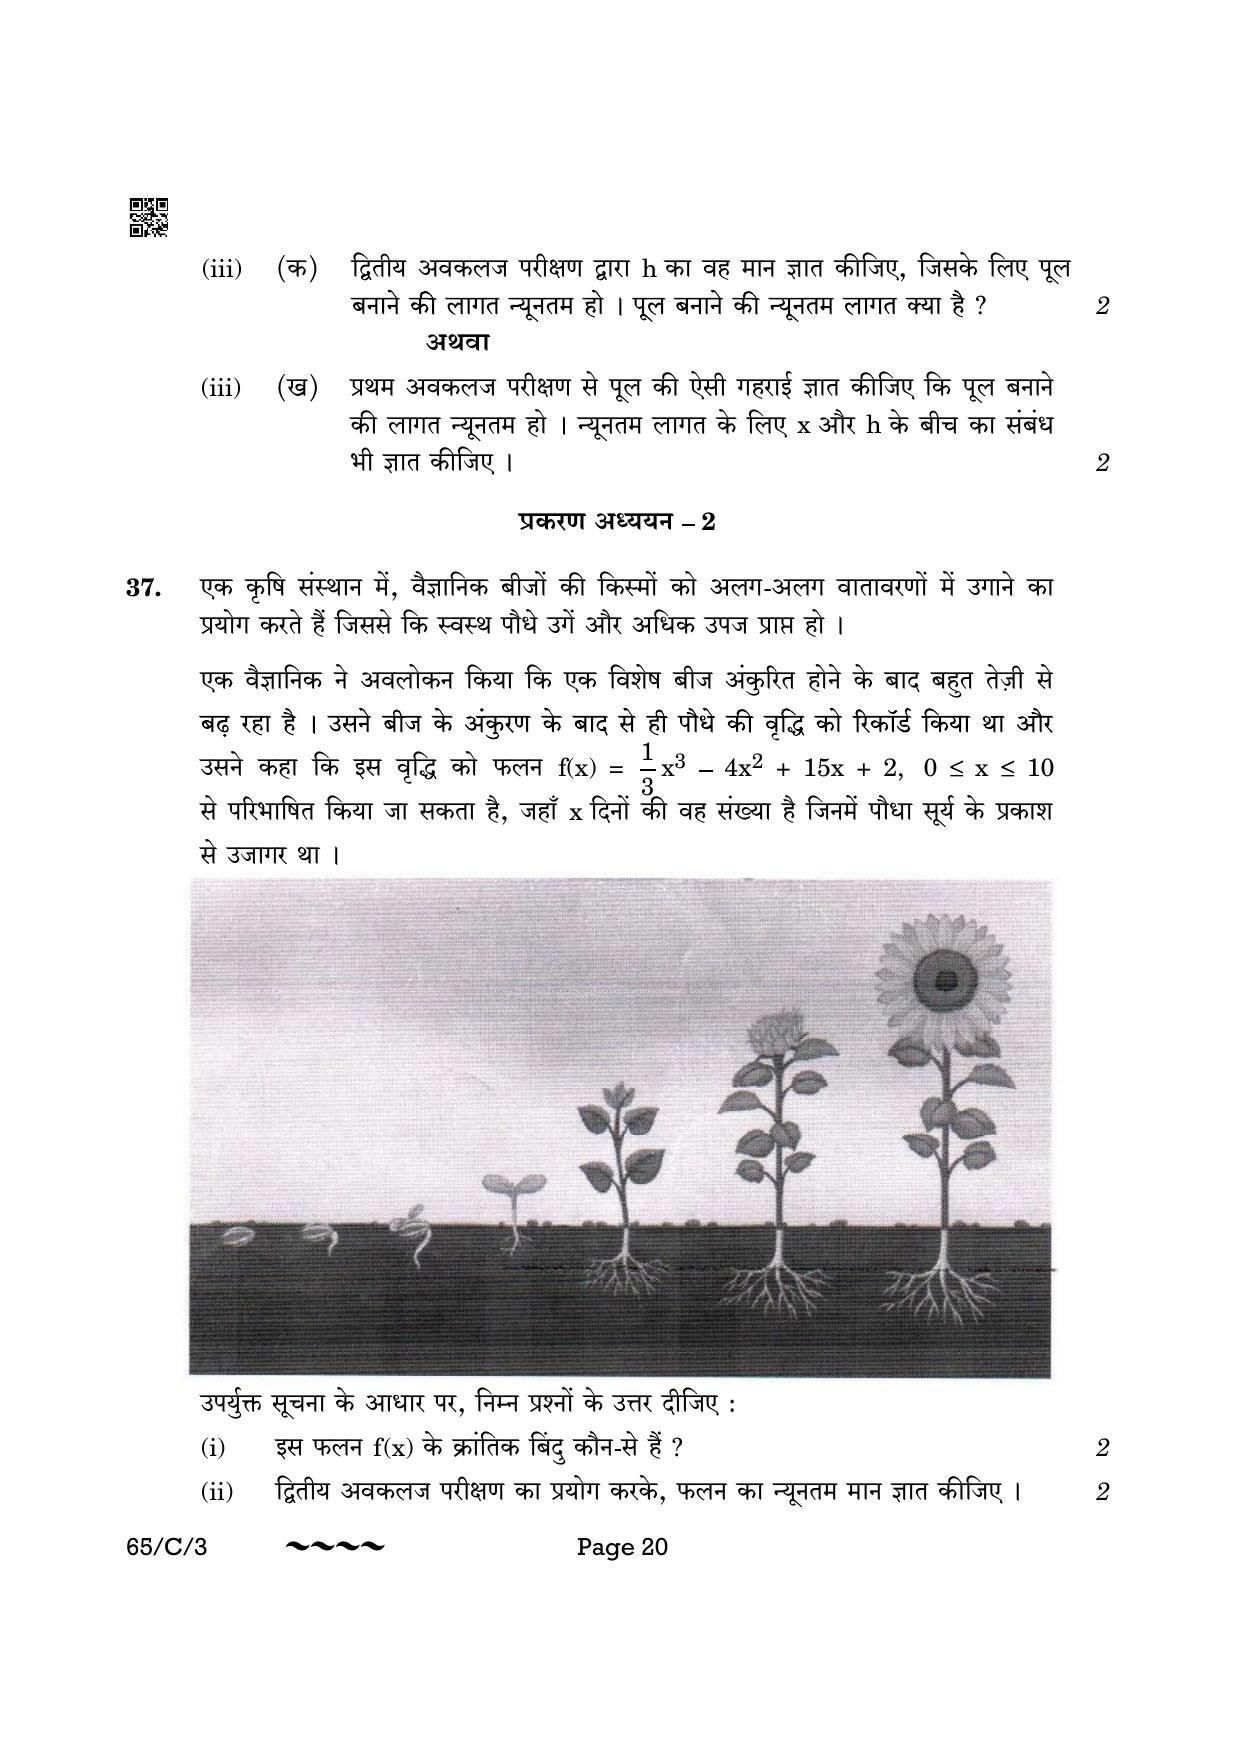 CBSE Class 12 65-3- Mathematics 2023 (Compartment) Question Paper - Page 20